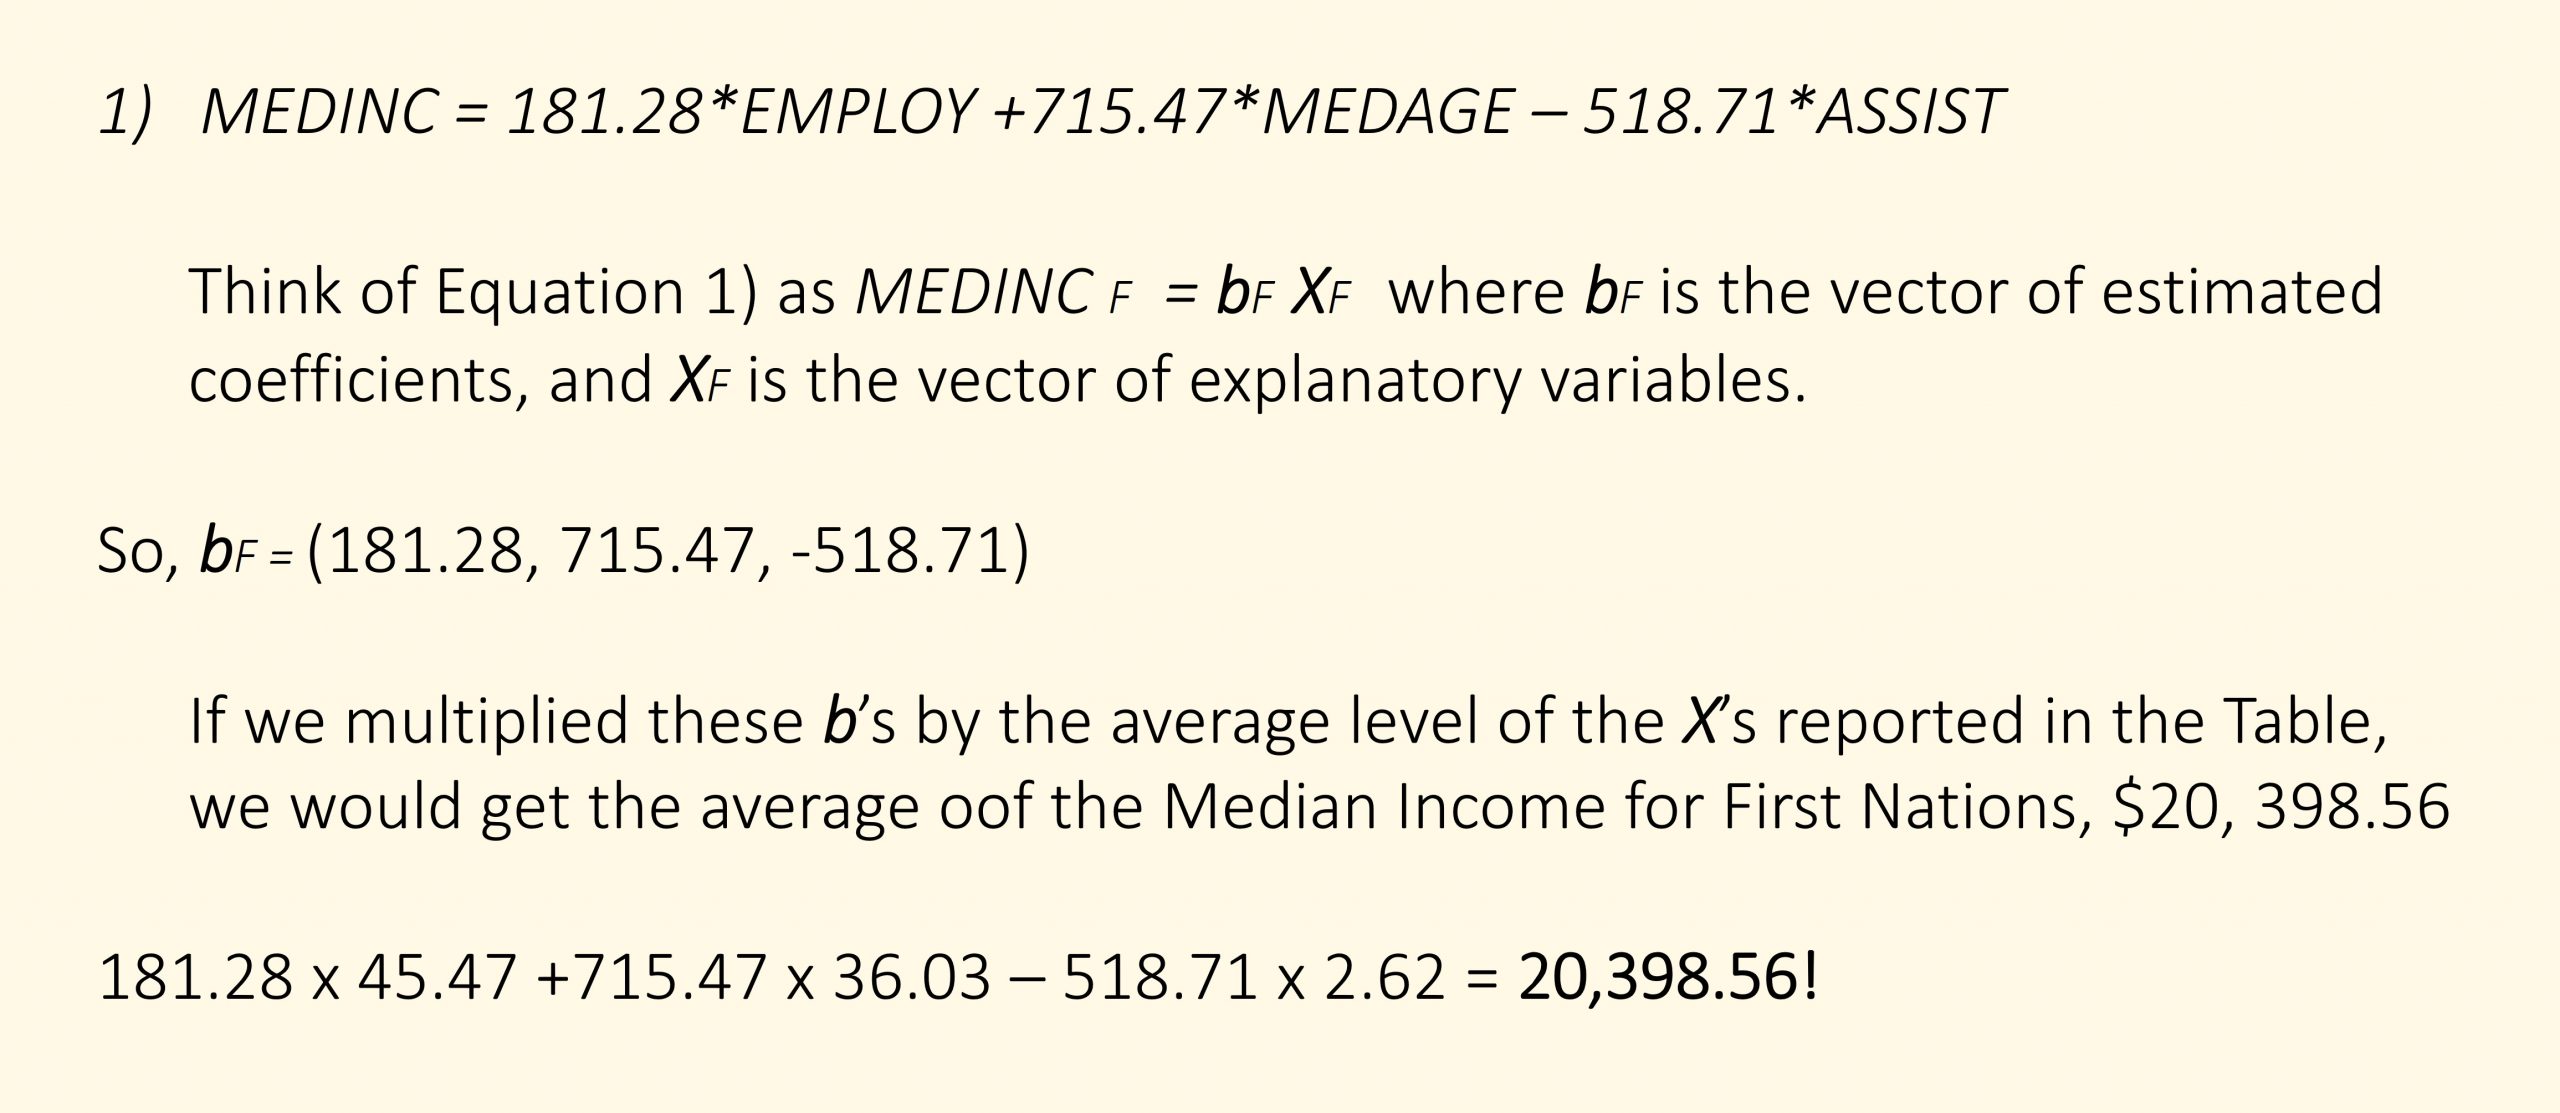 MEDINC = 181.28*EMPLOY +715.47*MEDAGE – 518.71*ASSIST Think of Equation 1) as MEDINC F = bF XF where bF is the vector of estimated coefficients, and XF is the vector of explanatory variables. So, bF = (181.28, 715.47, -518.71) If we multiplied these b’s by the average level of the X’s reported in the Table, we would get the average oof the Median Income for First Nations, $20, 398.56 181.28 x 45.47 +715.47 x 36.03 – 518.71 x 2.62 = 20,398.56!